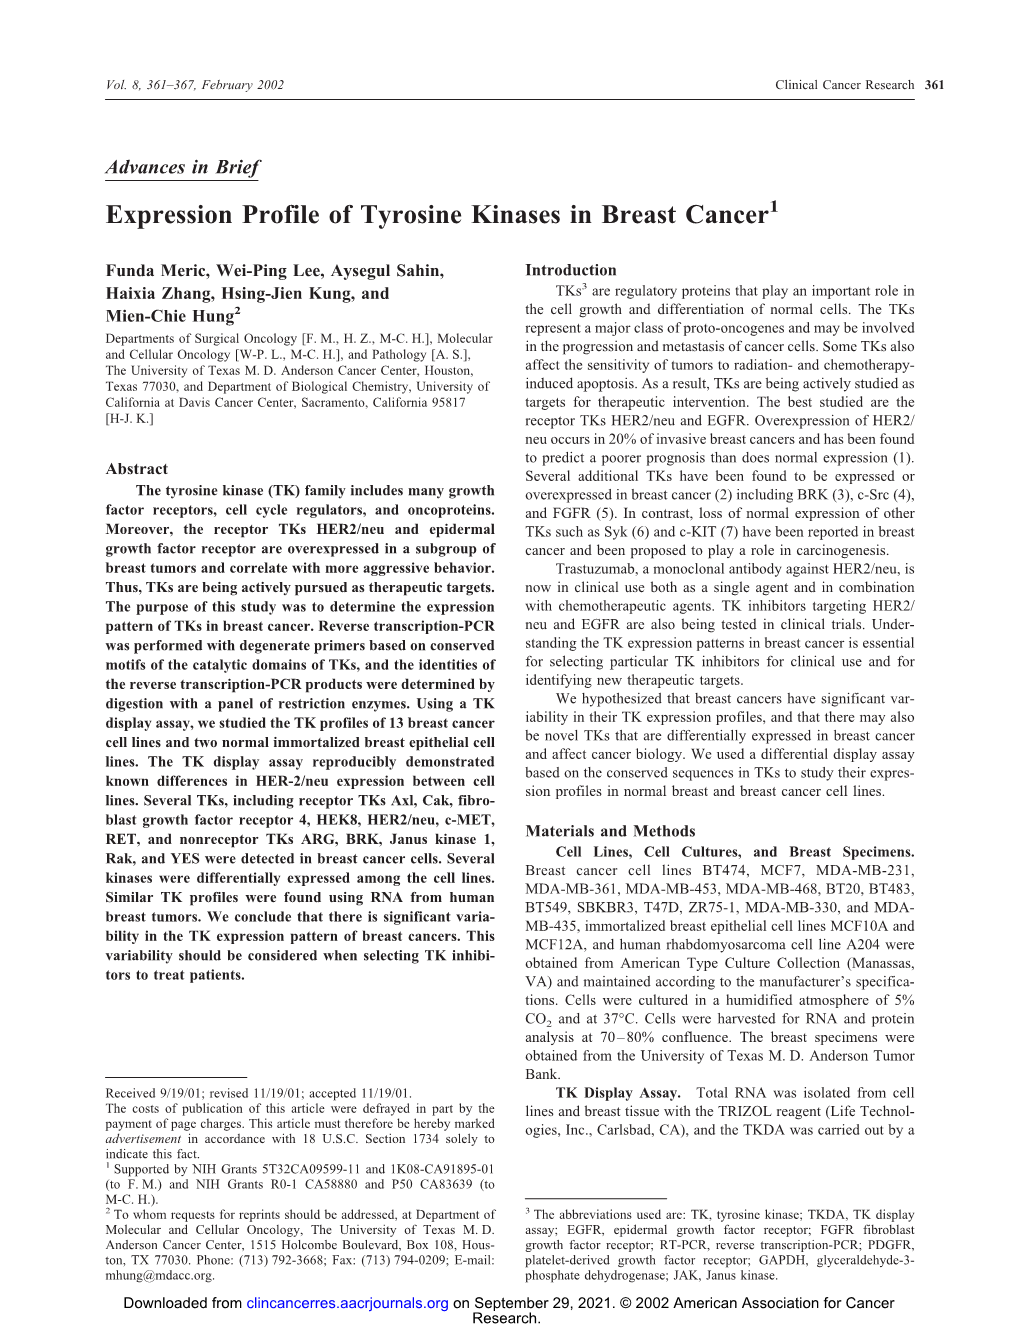 Expression Profile of Tyrosine Kinases in Breast Cancer1